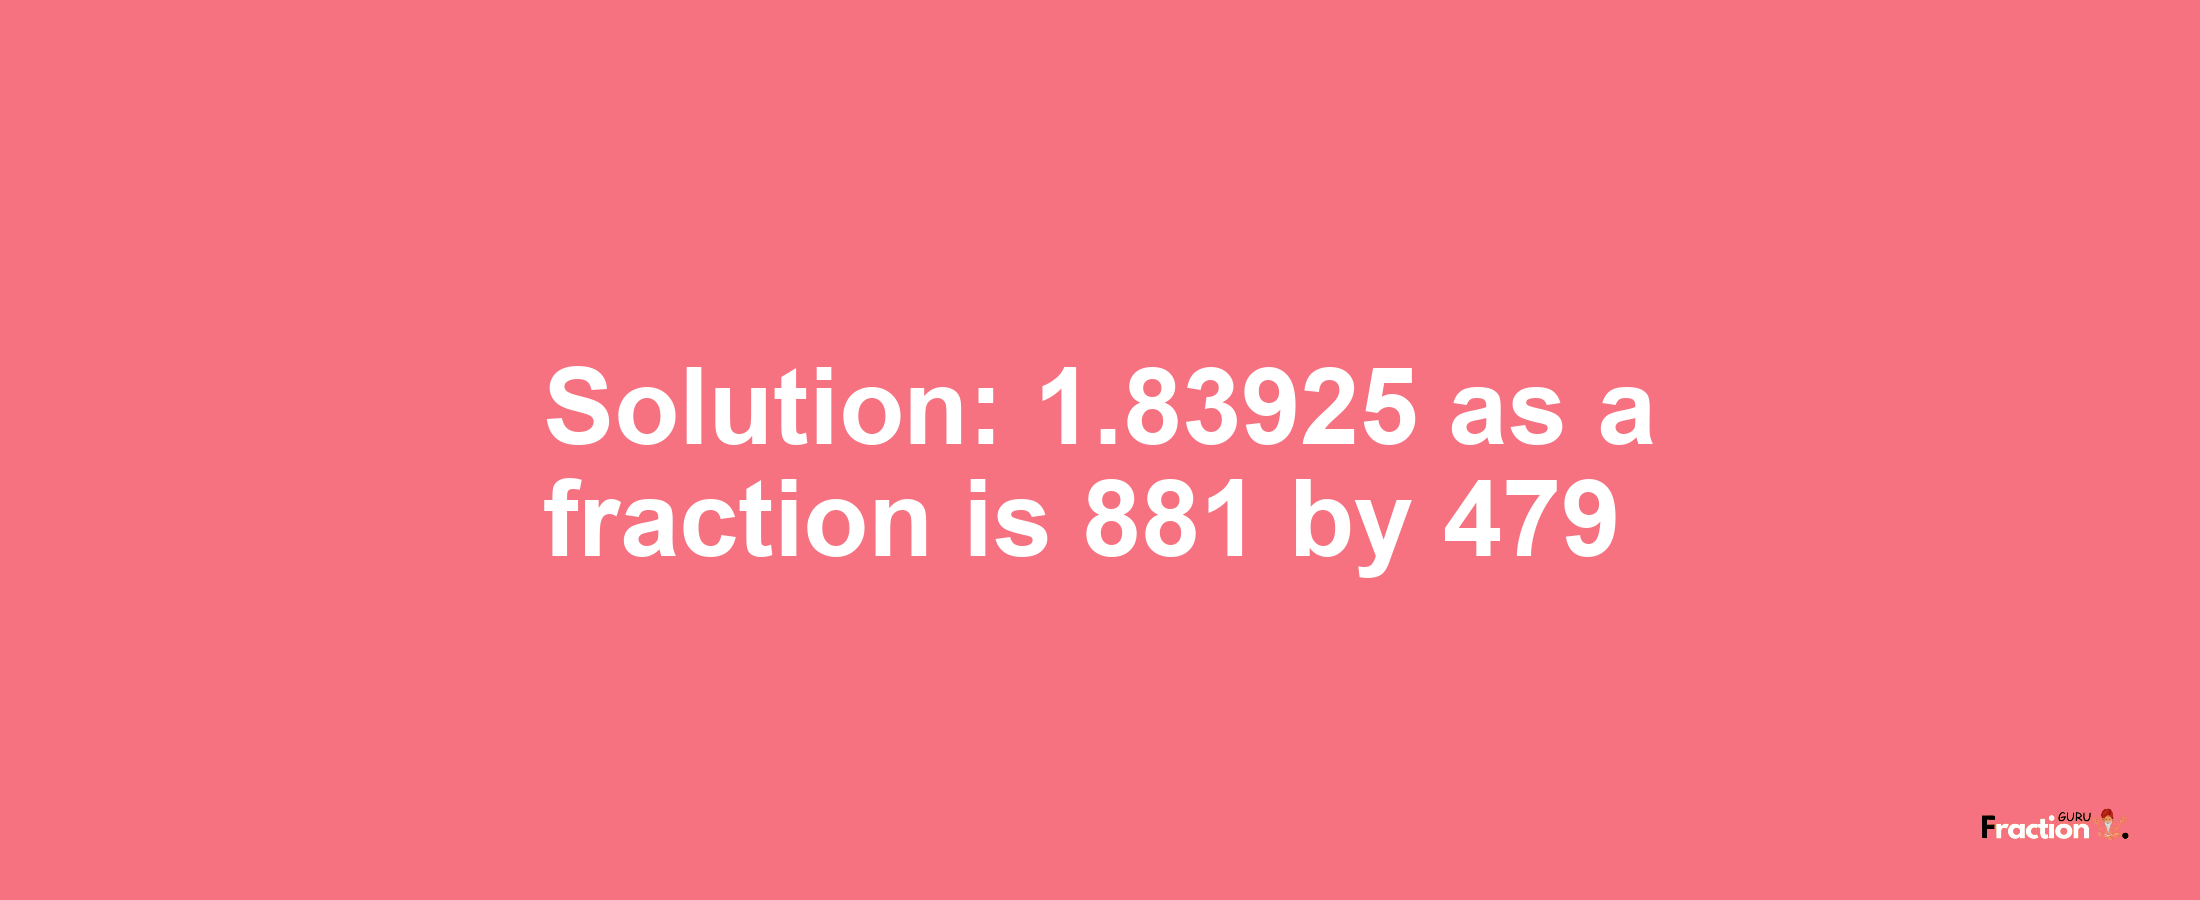 Solution:1.83925 as a fraction is 881/479